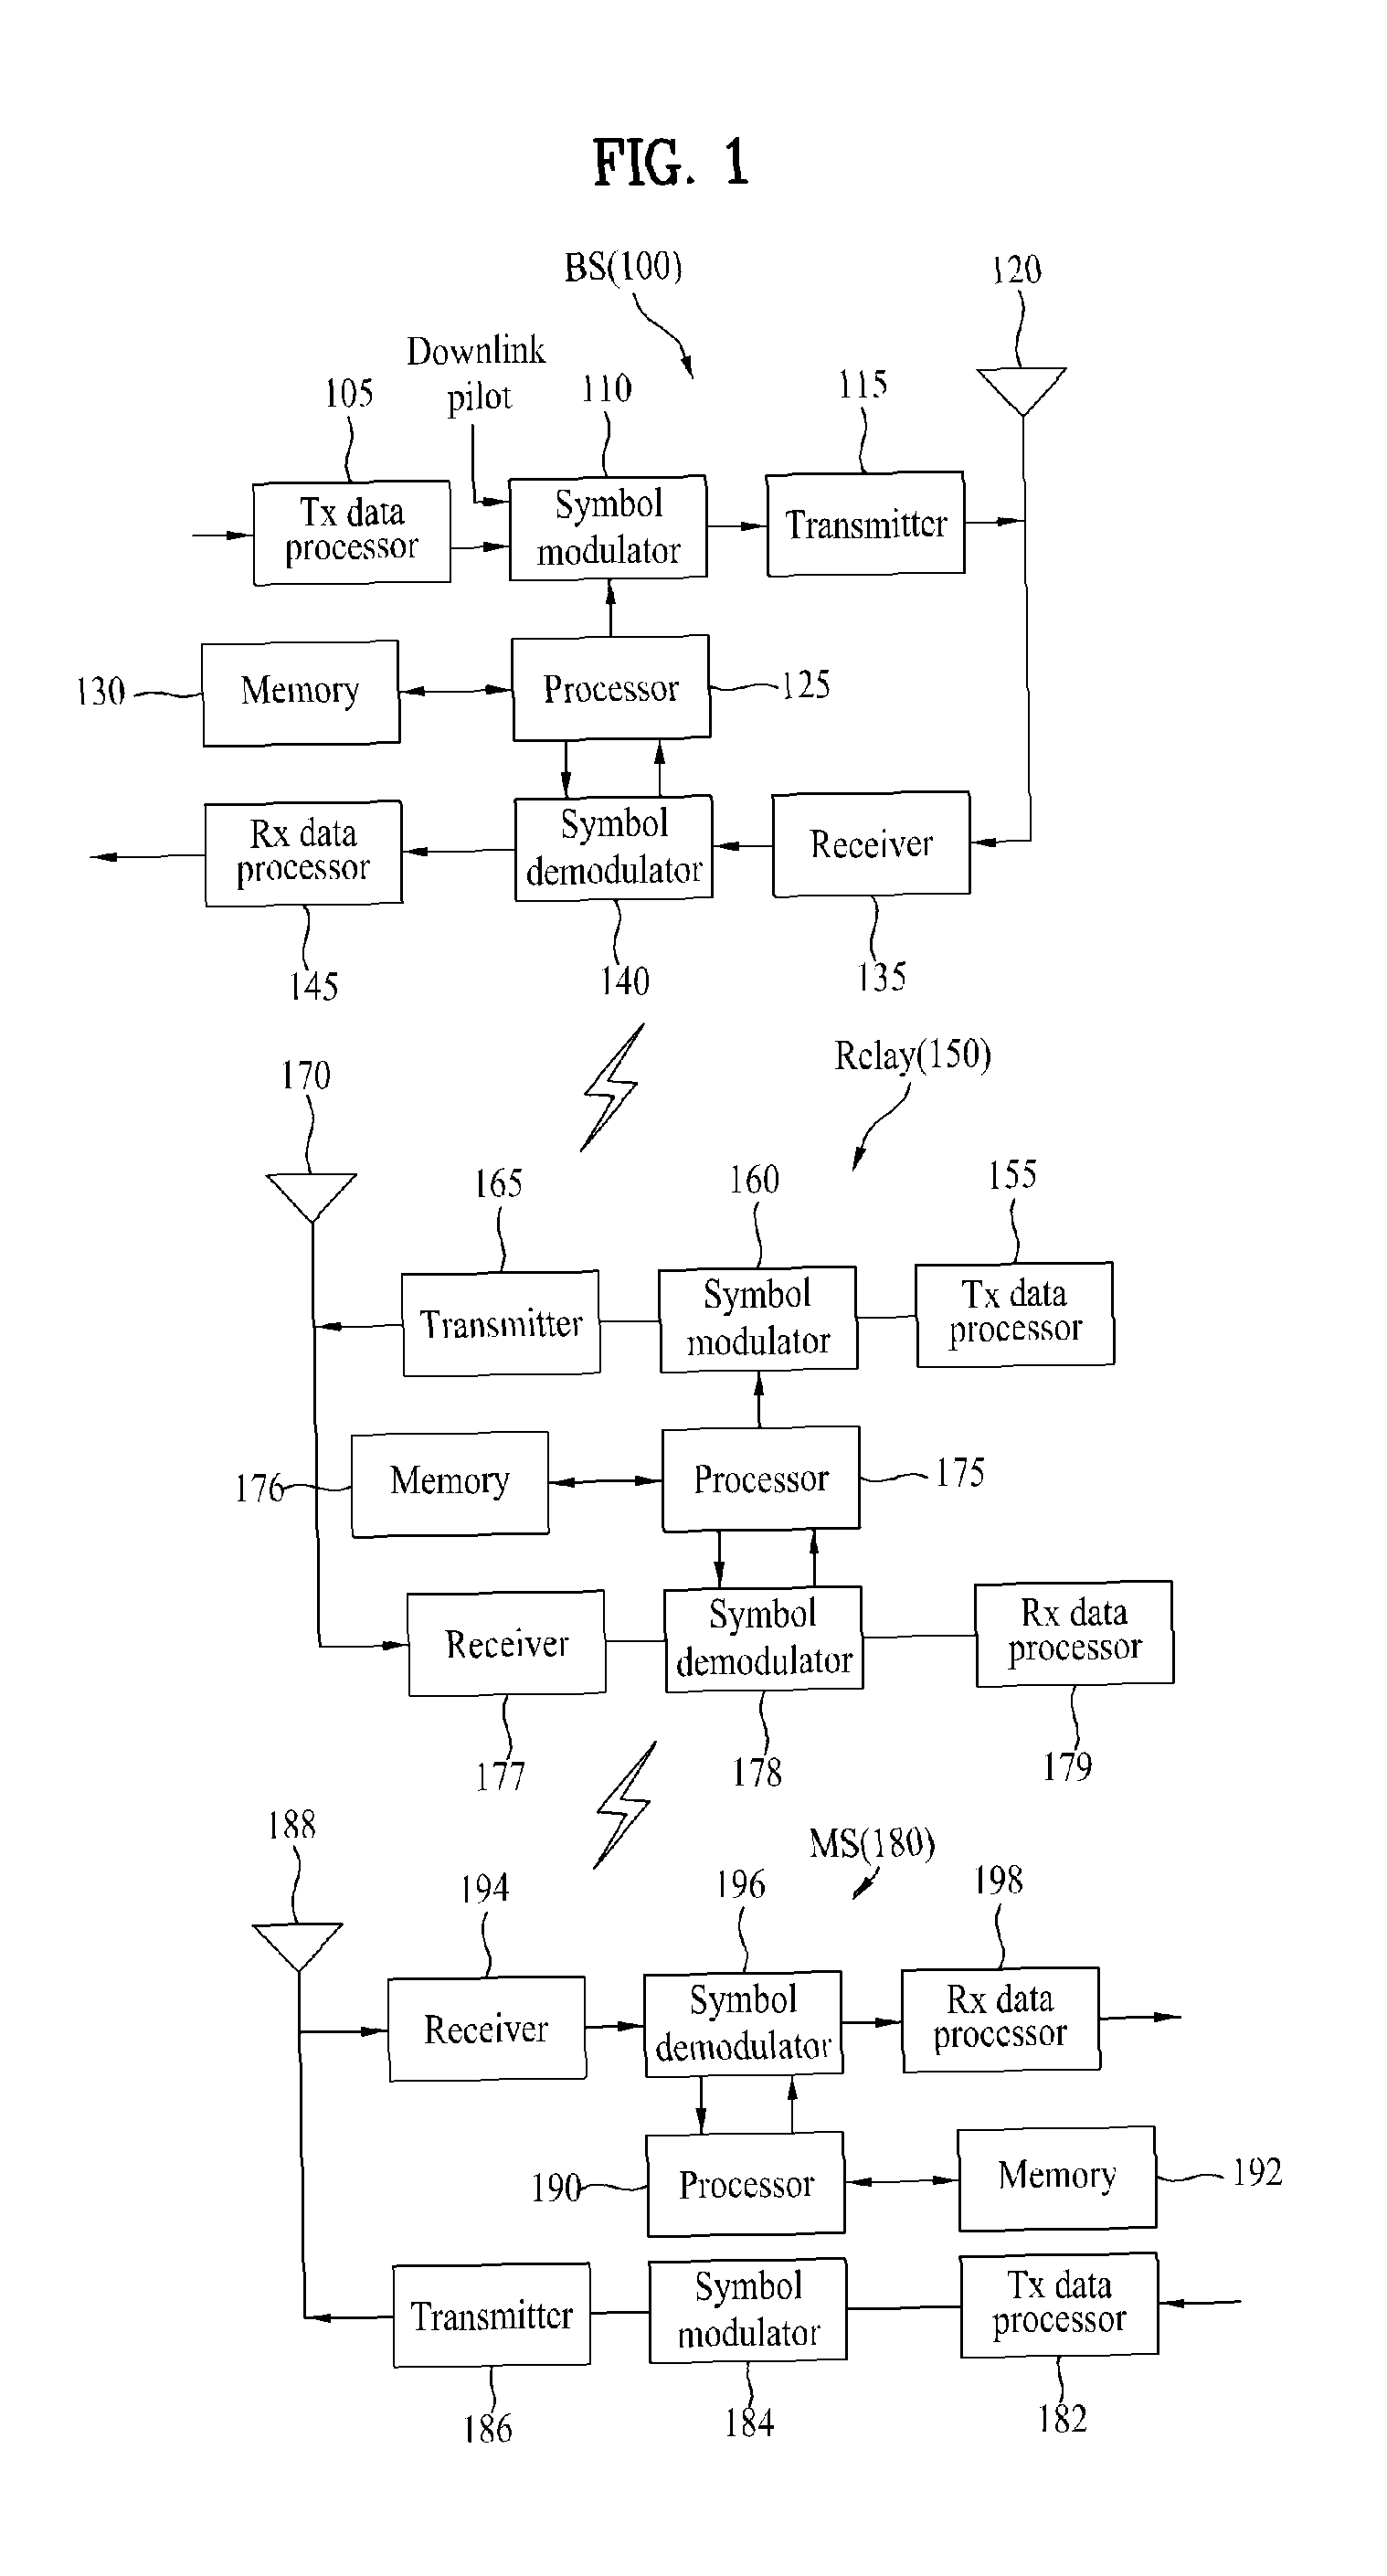 Apparatus and method for transceiving a signal using a predetermined frame structure in a wireless communication system